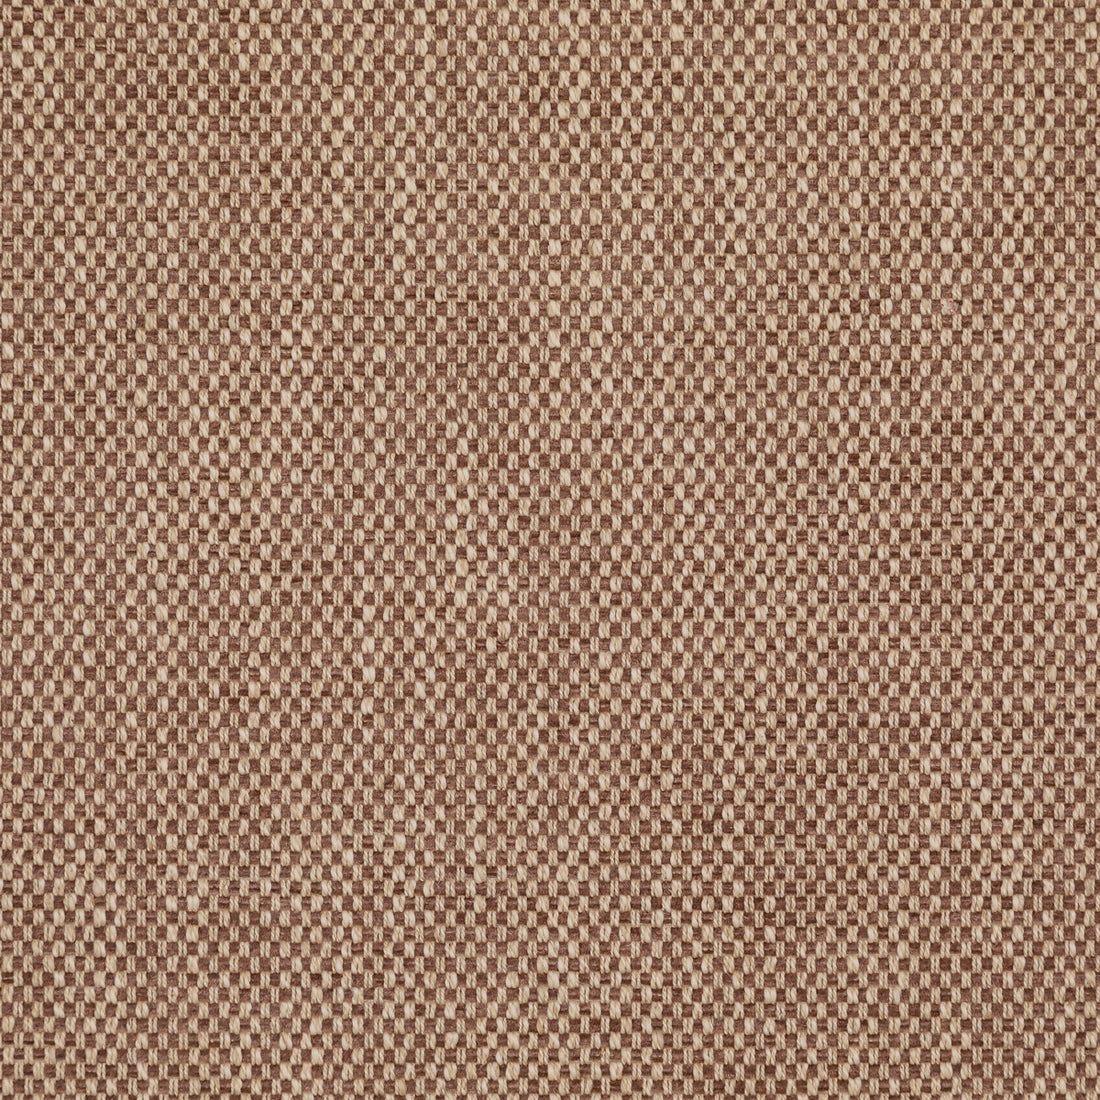 Carlton fabric in heather color - pattern BFC-3692.710.0 - by Lee Jofa in the Blithfield collection